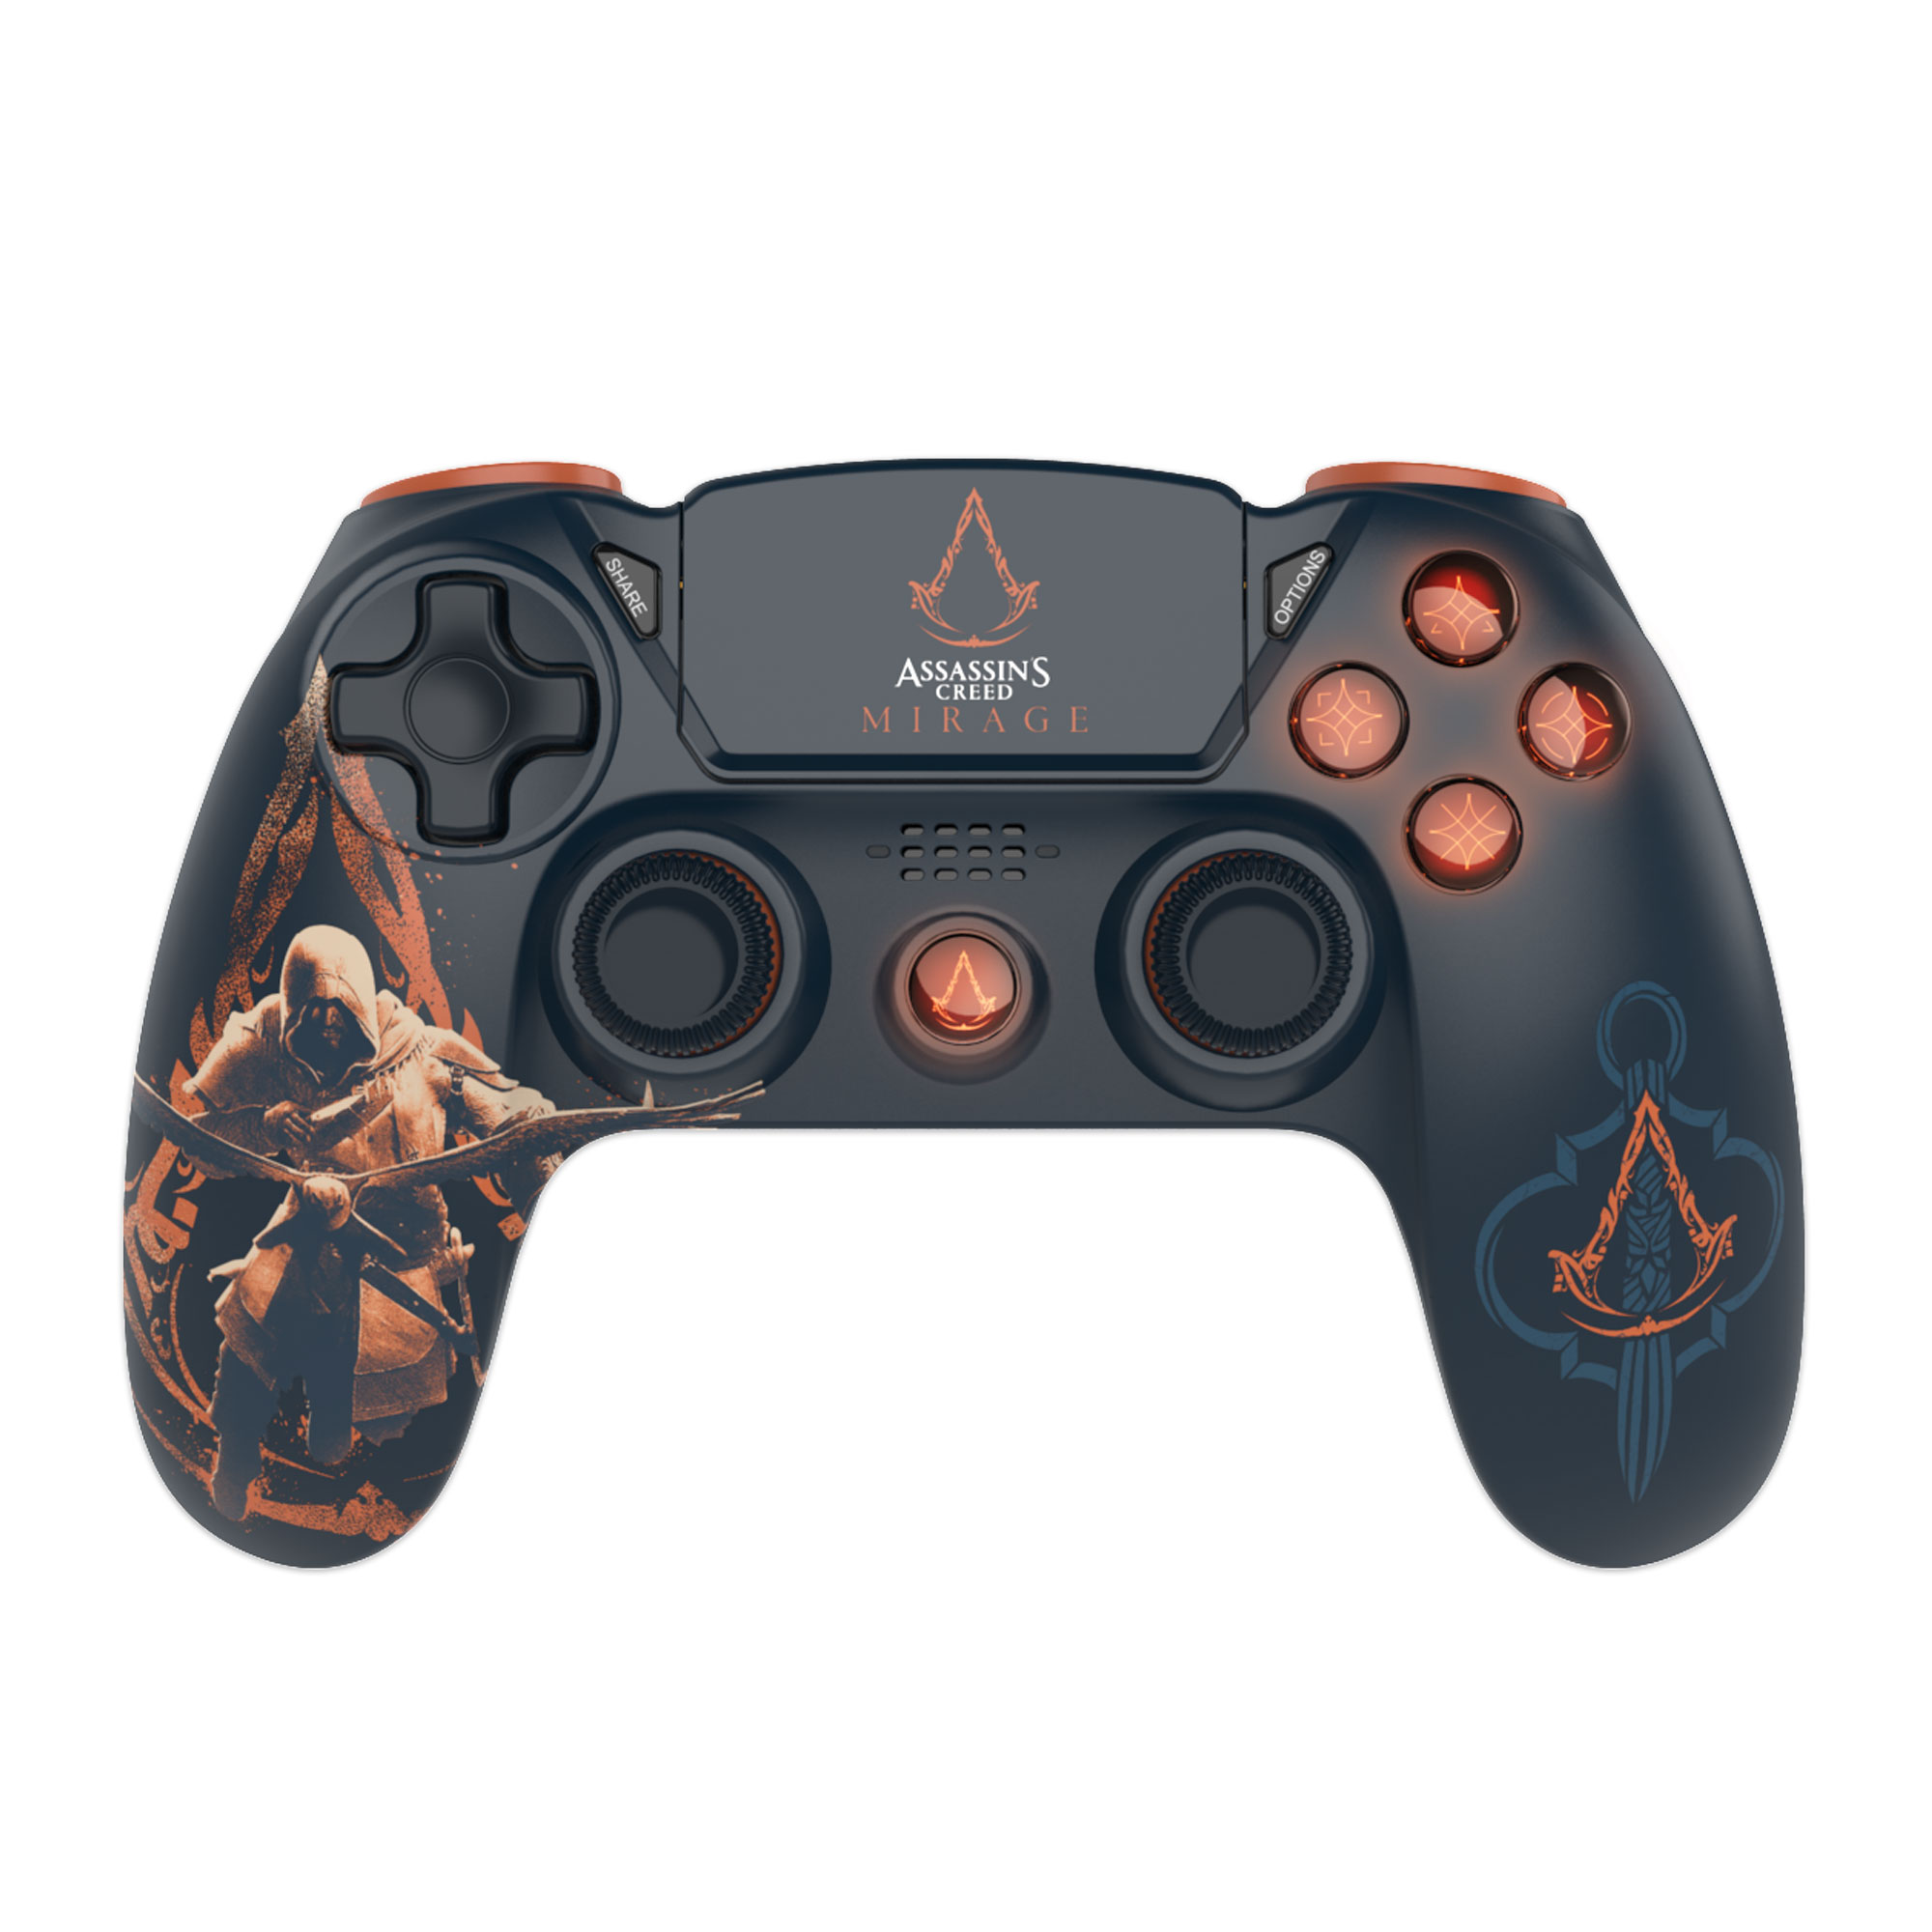 Buy Assassins Creed Mirage - Wireless Controller - Free shipping